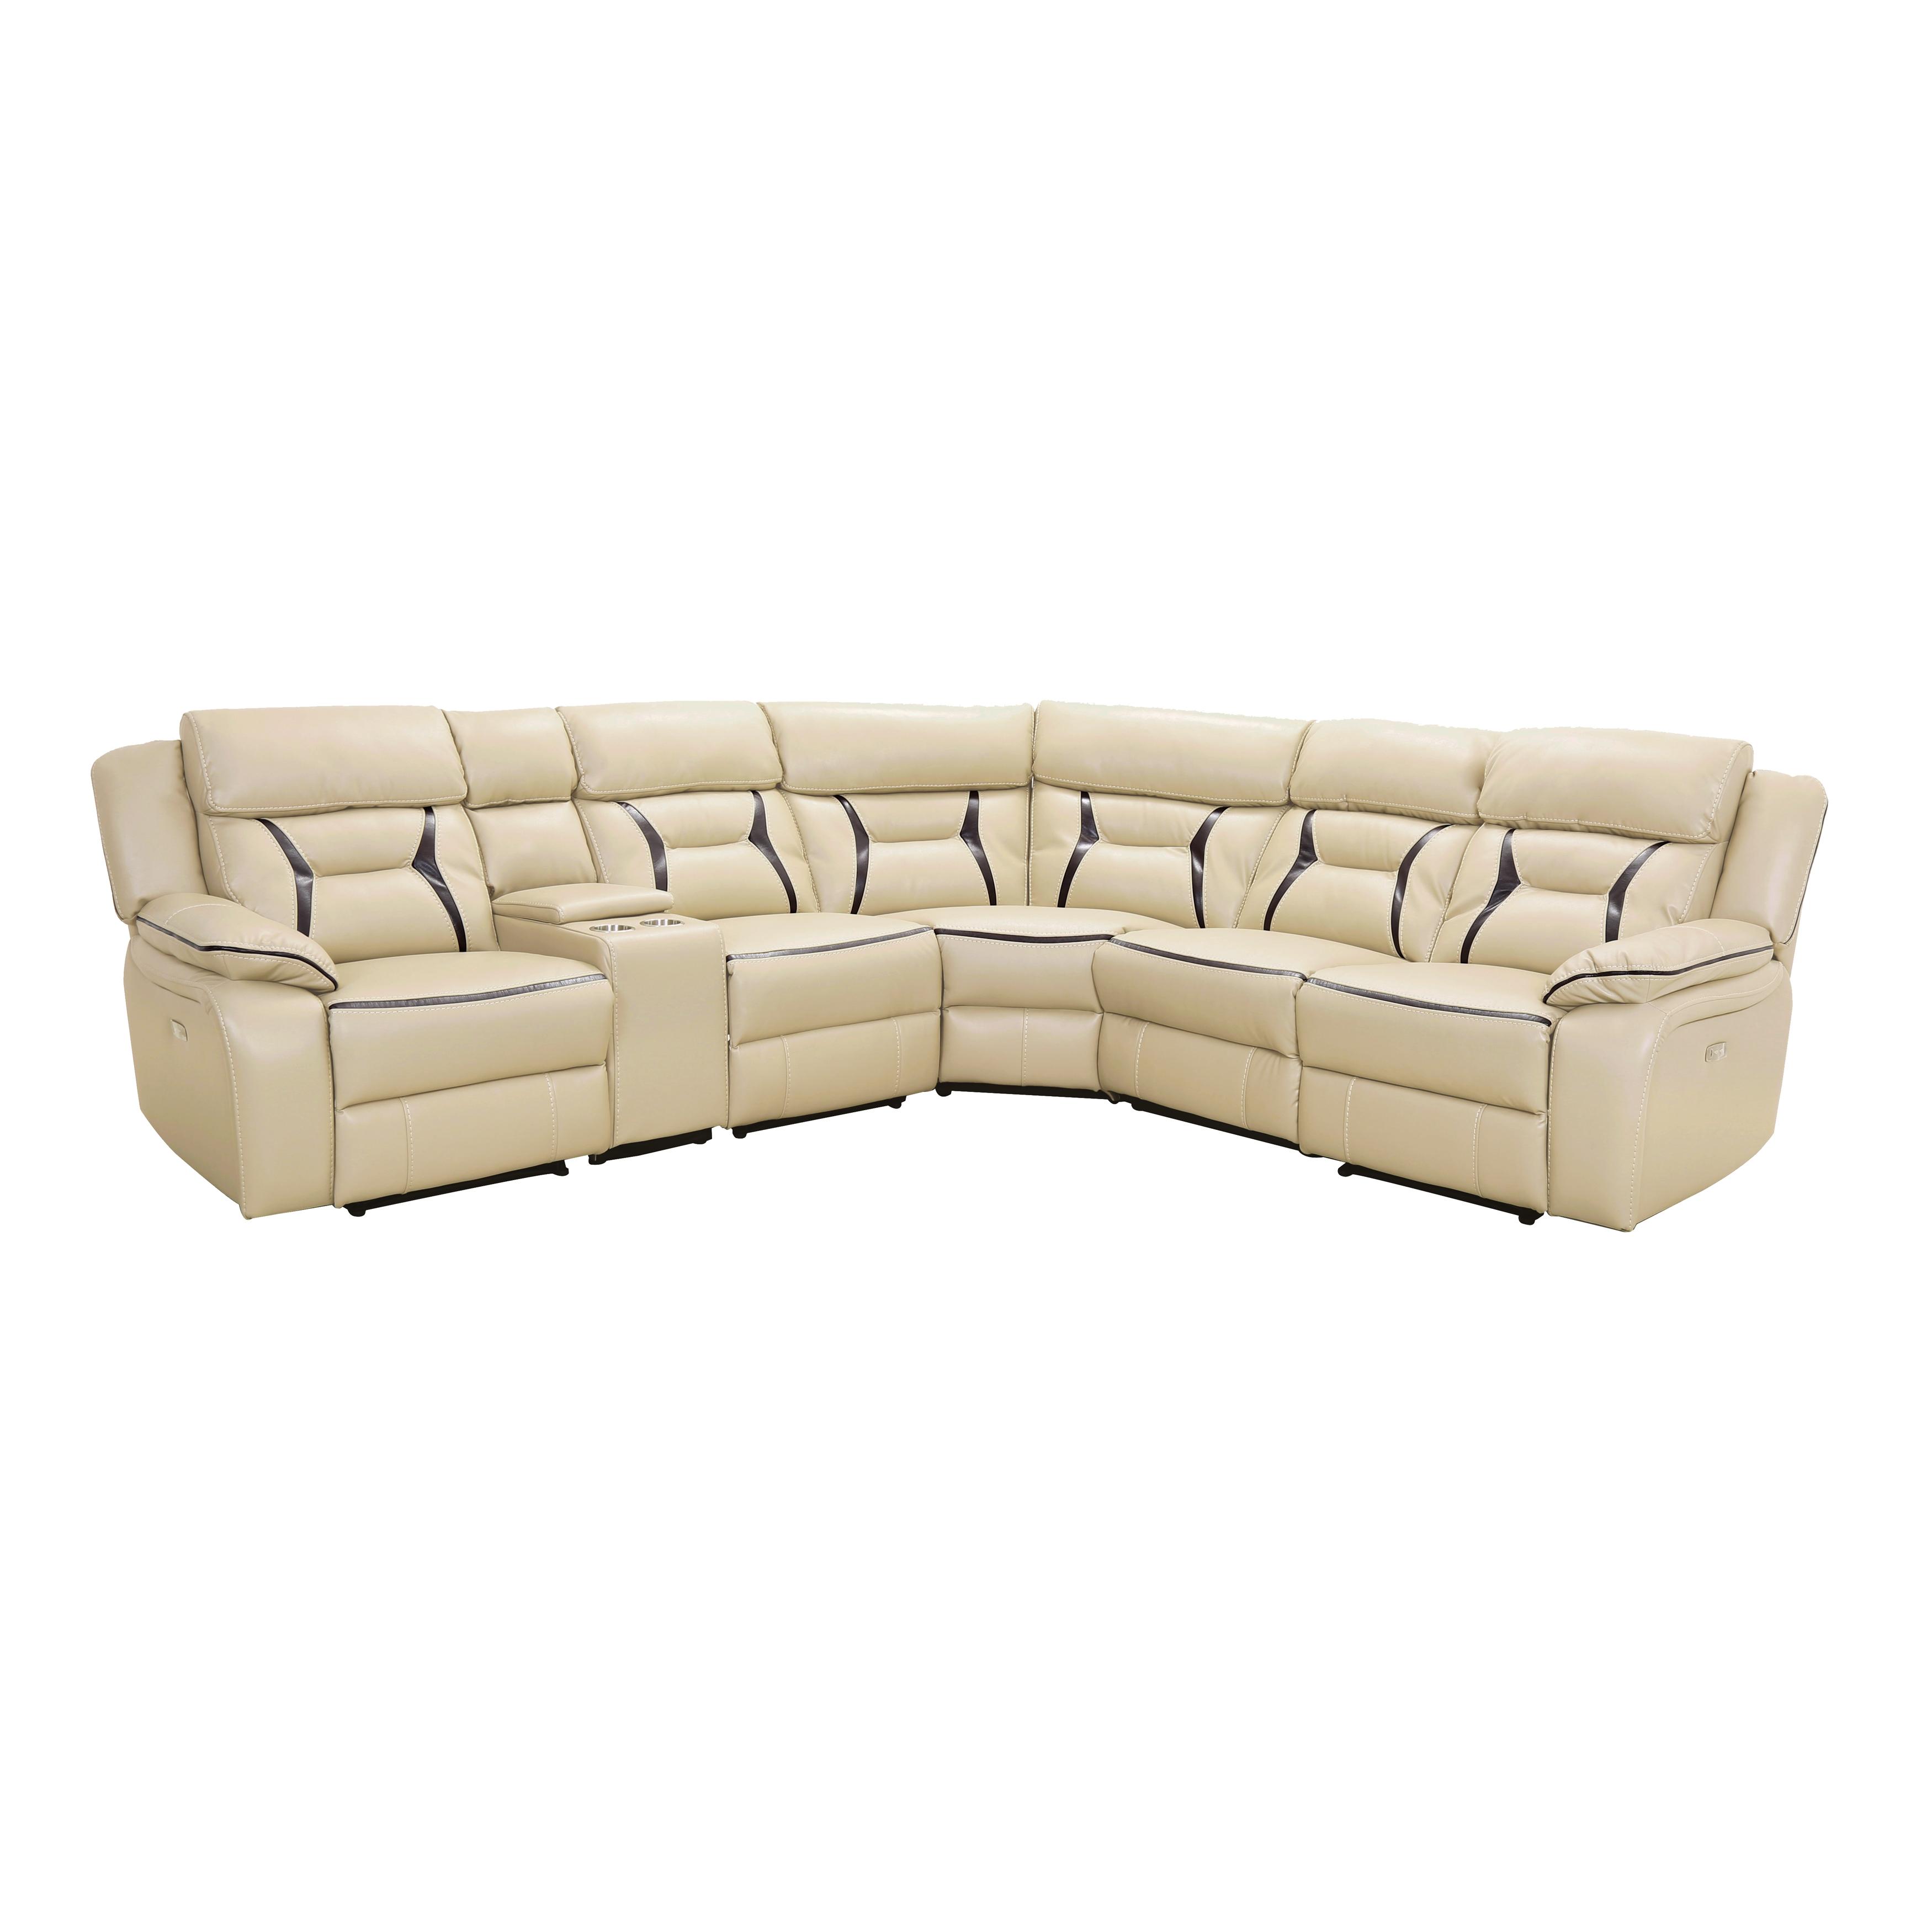 Modern Power Reclining Sectional 8229*6PW Amite 8229*6PW in Beige Faux Leather